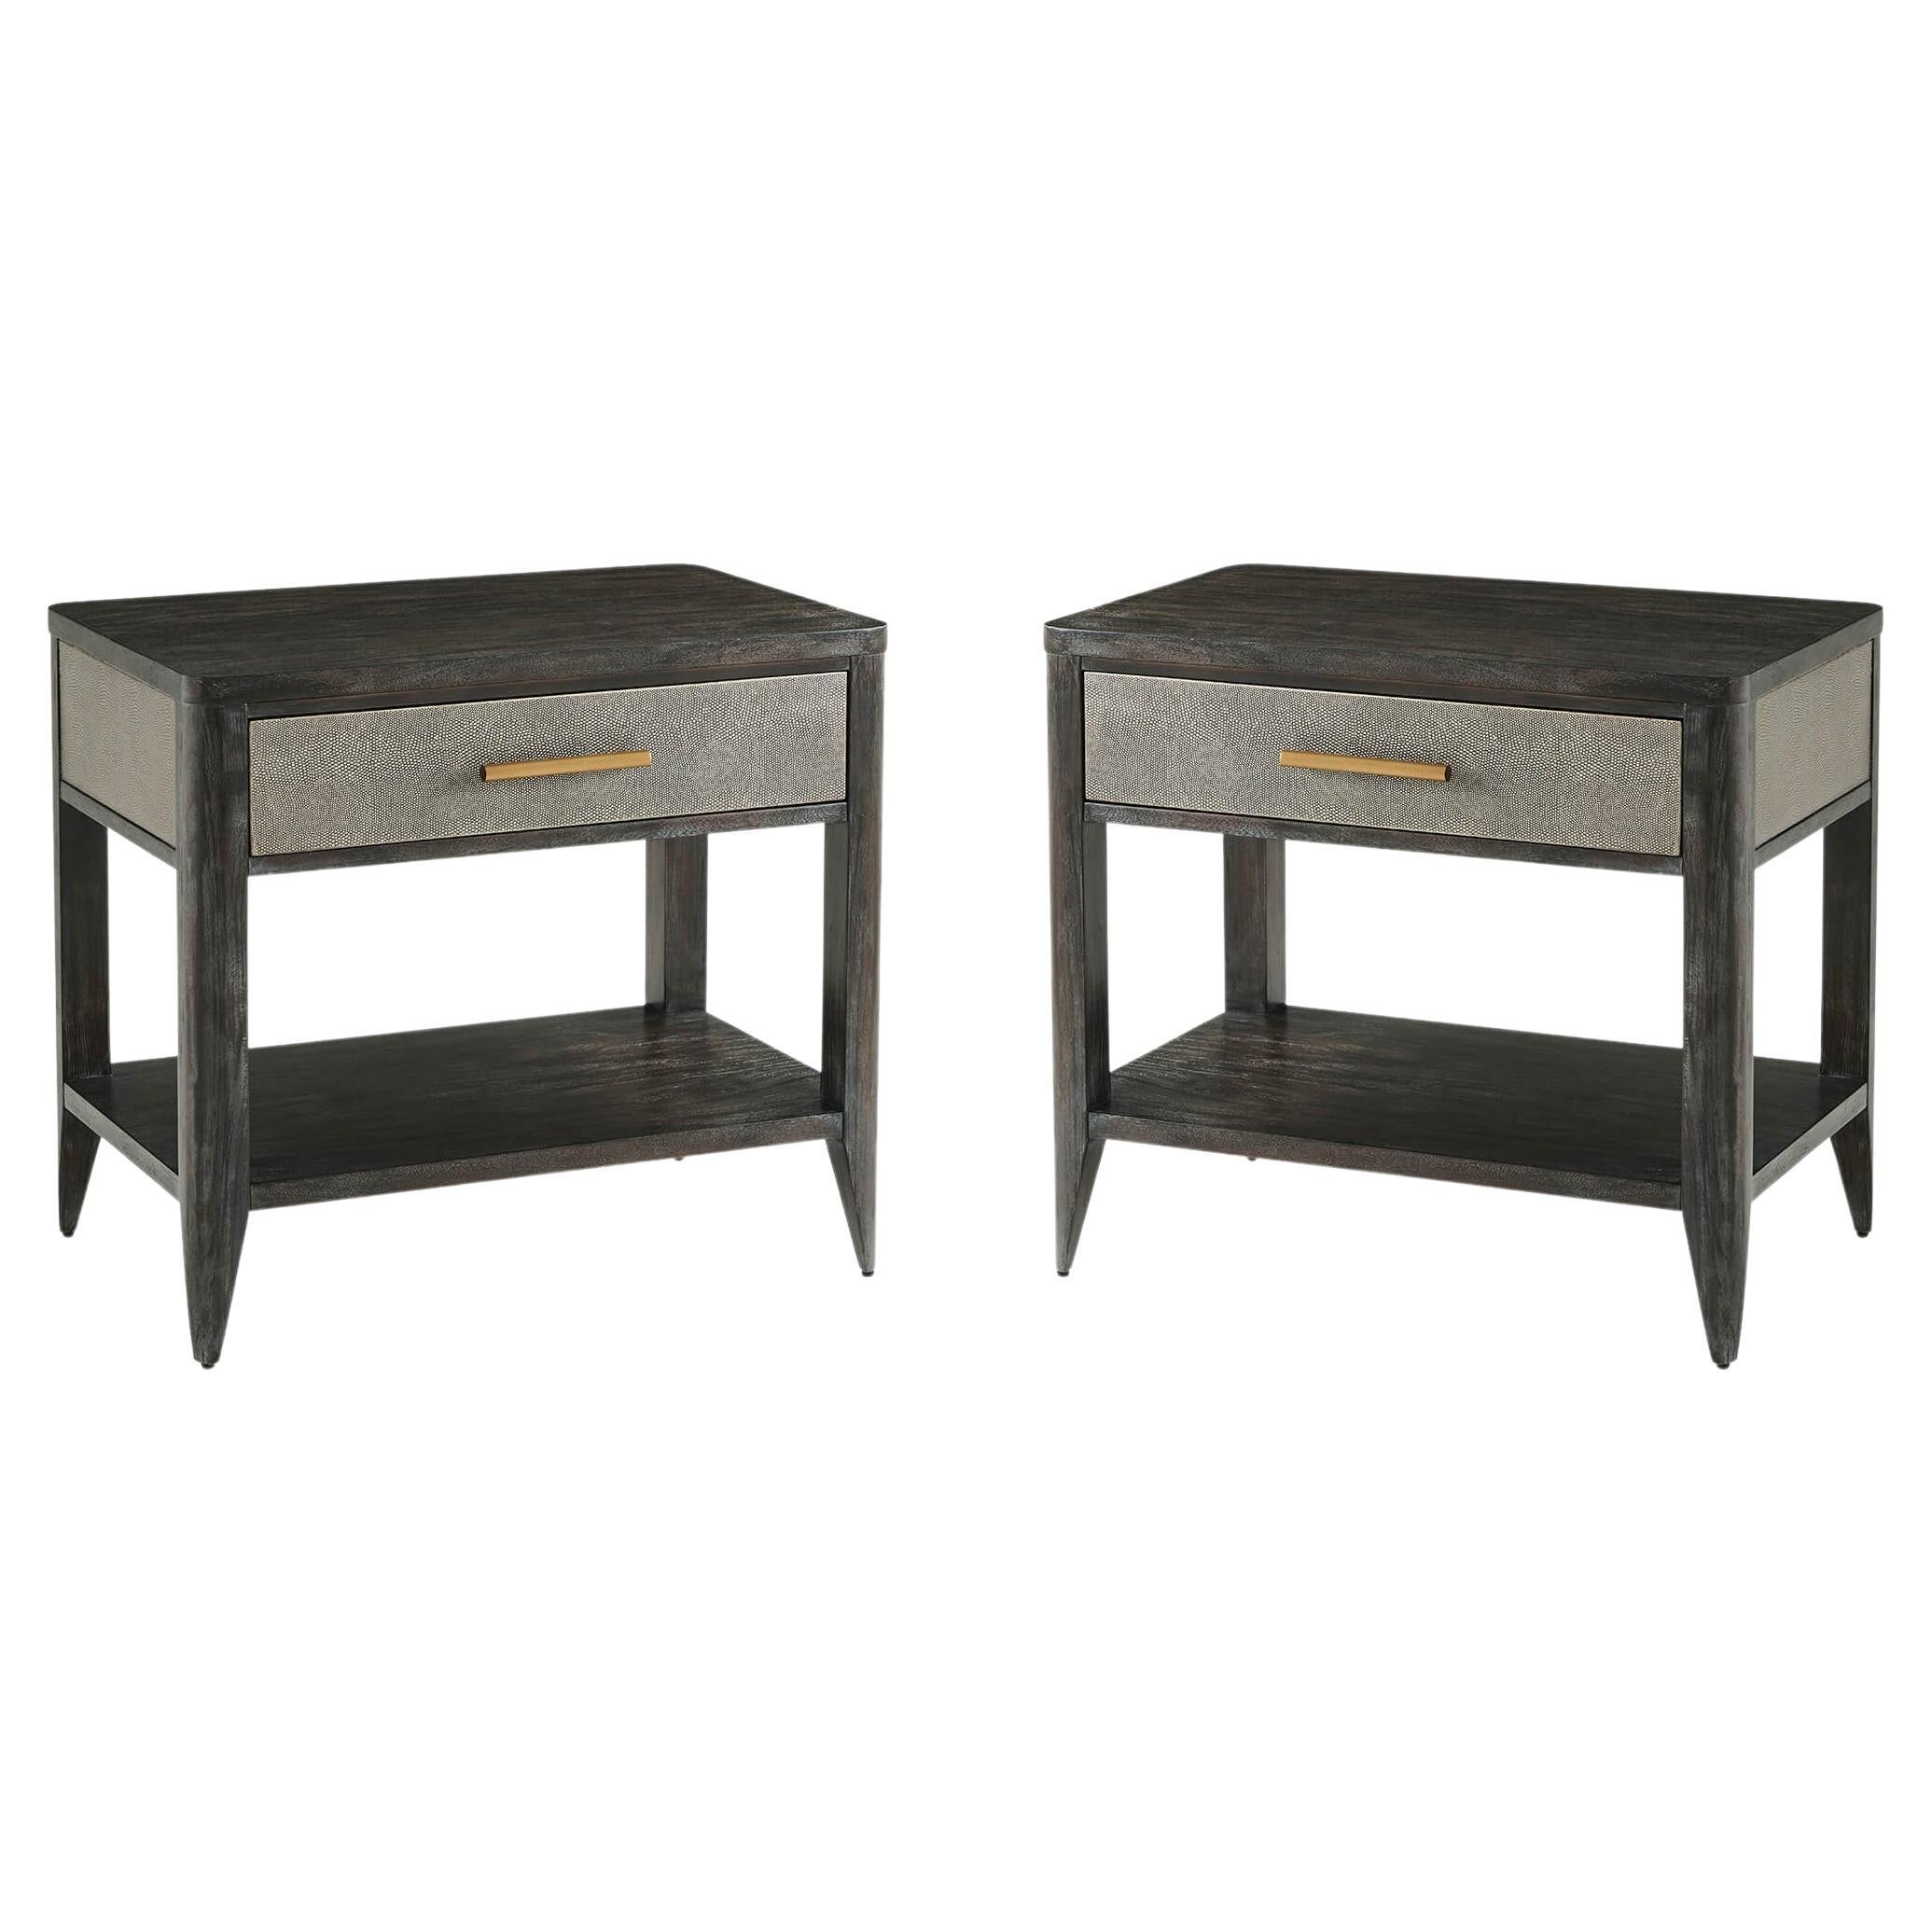 Pair of Dark Mid Century Bedside Tables For Sale